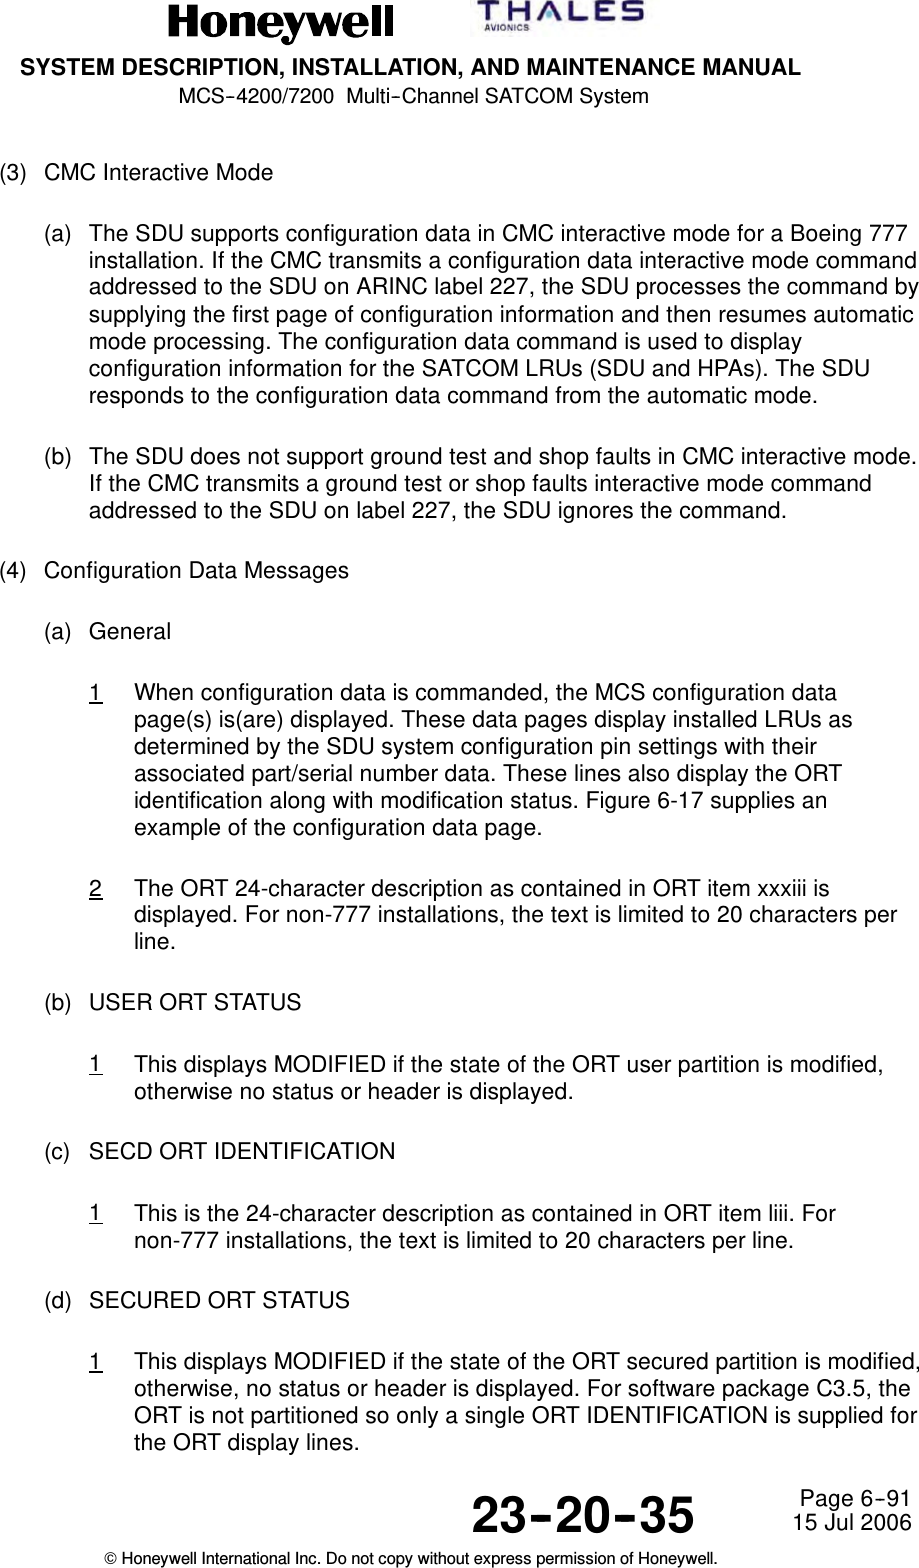 SYSTEM DESCRIPTION, INSTALLATION, AND MAINTENANCE MANUALMCS--4200/7200 Multi--Channel SATCOM System23--20--35 15 Jul 2006Honeywell International Inc. Do not copy without express permission of Honeywell.Page 6--91(3) CMC Interactive Mode(a) The SDU supports configuration data in CMC interactive mode for a Boeing 777installation. If the CMC transmits a configuration data interactive mode commandaddressed to the SDU on ARINC label 227, the SDU processes the command bysupplying the first page of configuration information and then resumes automaticmode processing. The configuration data command is used to displayconfiguration information for the SATCOM LRUs (SDU and HPAs). The SDUresponds to the configuration data command from the automatic mode.(b) The SDU does not support ground test and shop faults in CMC interactive mode.If the CMC transmits a ground test or shop faults interactive mode commandaddressed to the SDU on label 227, the SDU ignores the command.(4) Configuration Data Messages(a) General1When configuration data is commanded, the MCS configuration datapage(s) is(are) displayed. These data pages display installed LRUs asdetermined by the SDU system configuration pin settings with theirassociated part/serial number data. These lines also display the ORTidentification along with modification status. Figure 6-17 supplies anexample of the configuration data page.2The ORT 24-character description as contained in ORT item xxxiii isdisplayed. For non-777 installations, the text is limited to 20 characters perline.(b) USER ORT STATUS1This displays MODIFIED if the state of the ORT user partition is modified,otherwise no status or header is displayed.(c) SECD ORT IDENTIFICATION1This is the 24-character description as contained in ORT item liii. Fornon-777 installations, the text is limited to 20 characters per line.(d) SECURED ORT STATUS1This displays MODIFIED if the state of the ORT secured partition is modified,otherwise, no status or header is displayed. For software package C3.5, theORT is not partitioned so only a single ORT IDENTIFICATION is supplied forthe ORT display lines.